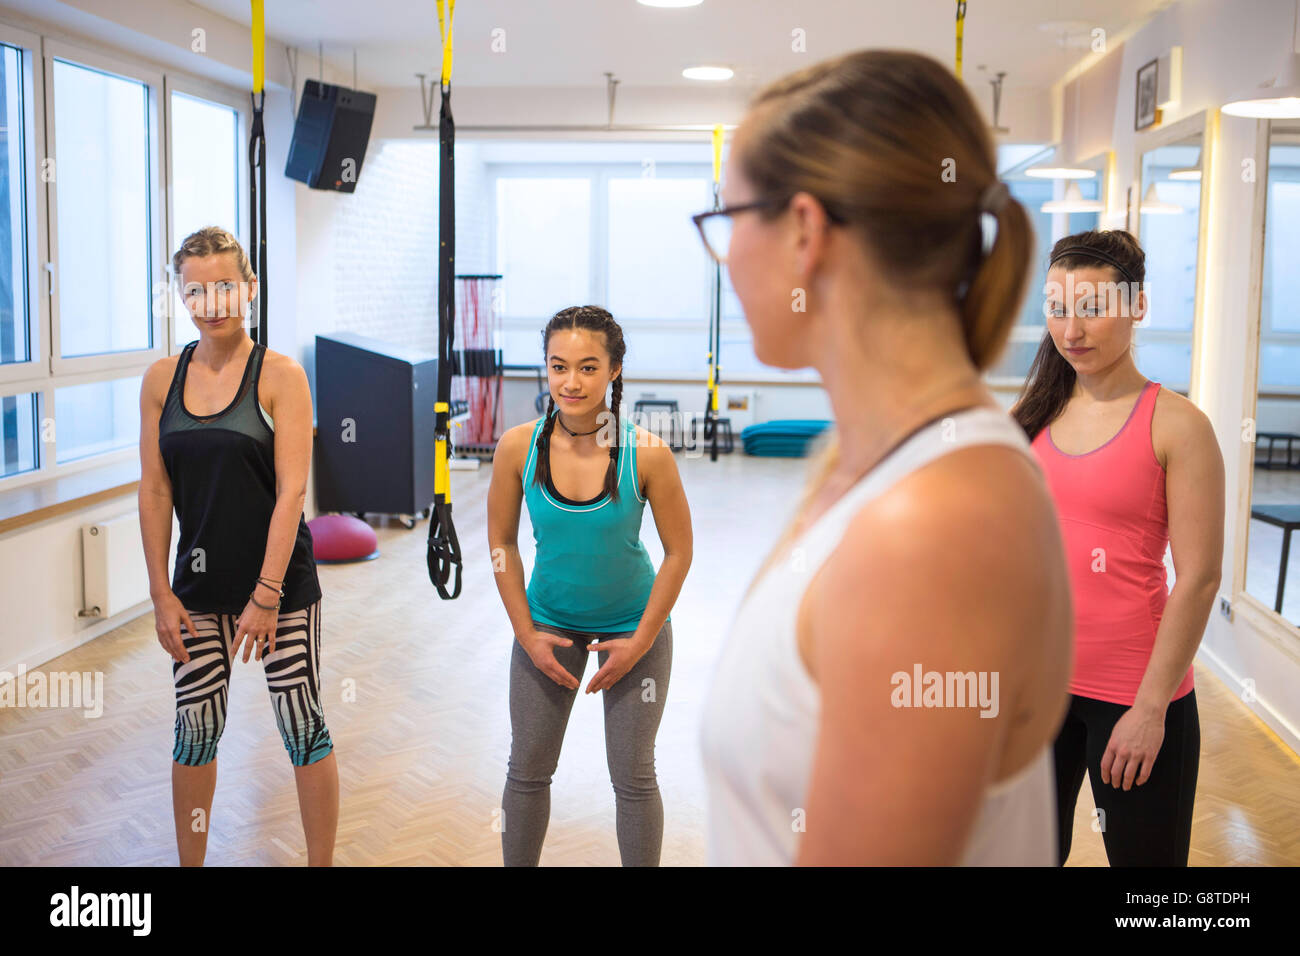 Fitness instructor teaches women how to perform suspension exercises Stock Photo